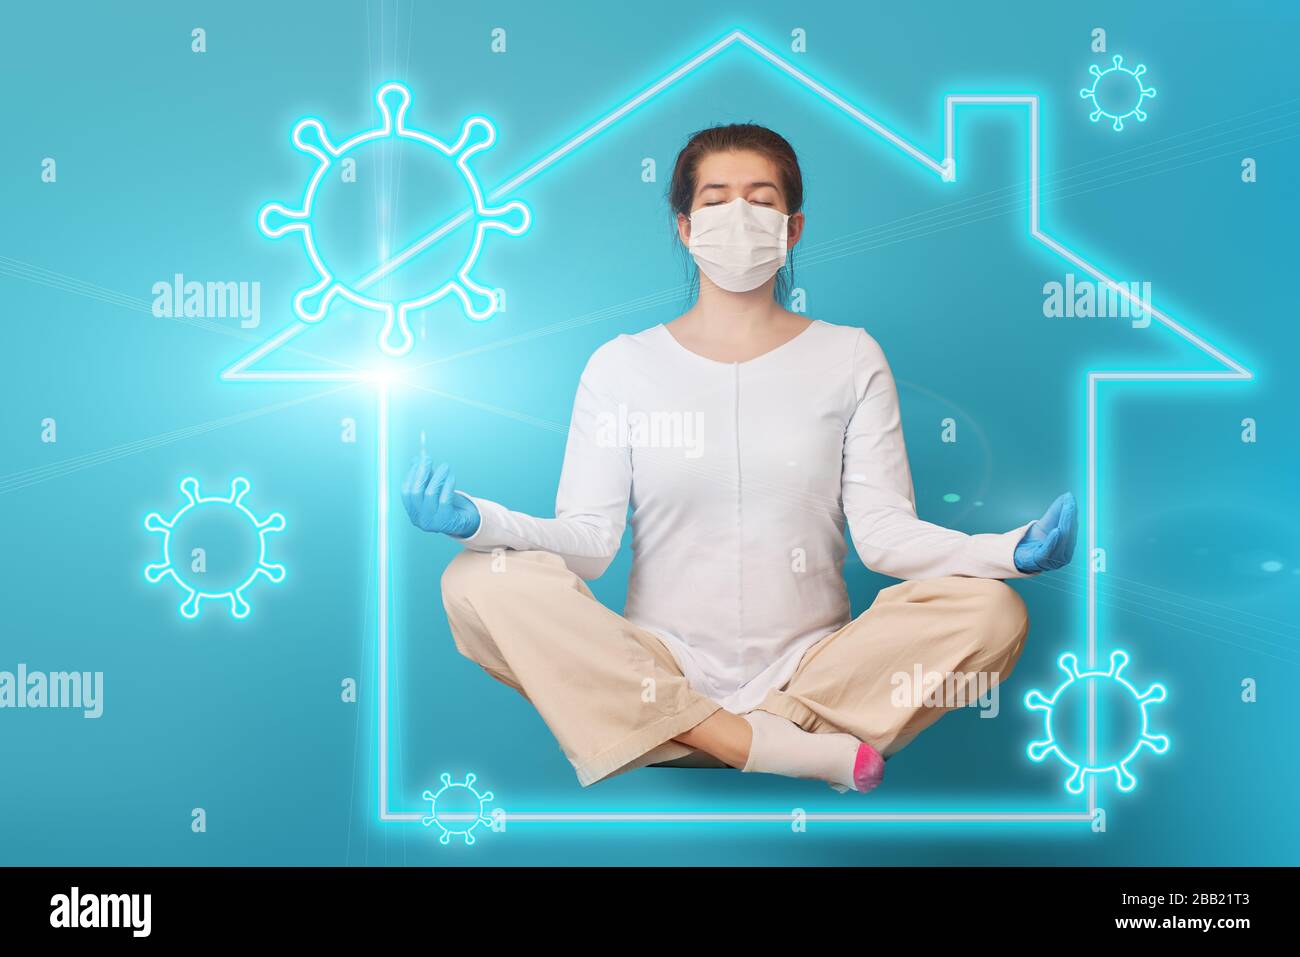 Woman levitates and relaxing in lotus pose inside symbol of house that protects her from viruses. Concept of staying at home, quarantine. Prevention m Stock Photo